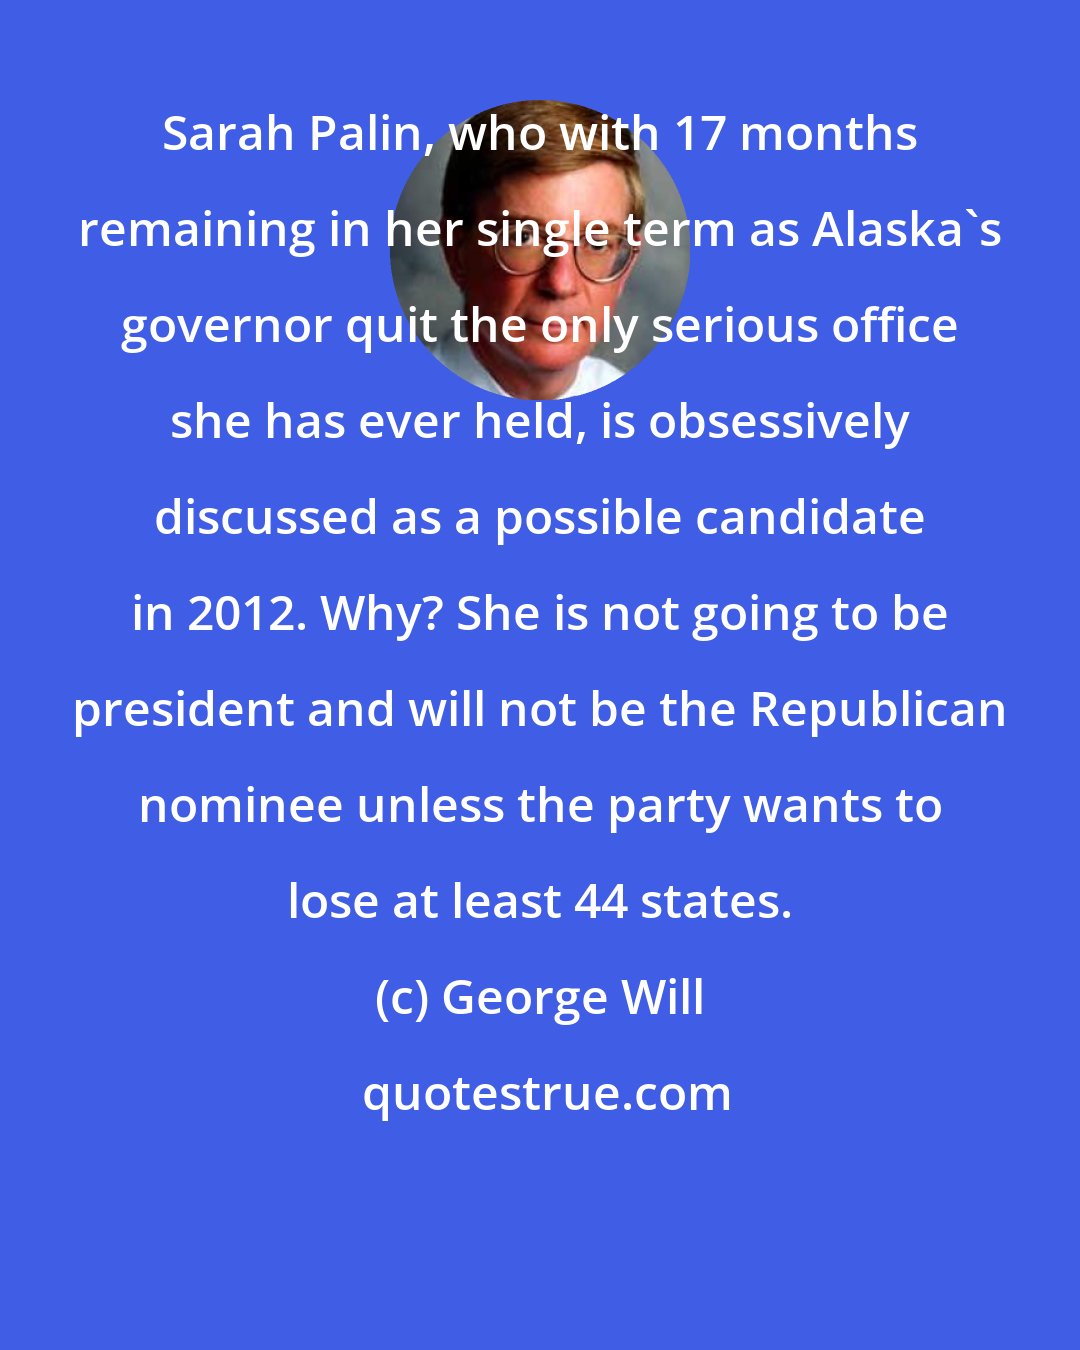 George Will: Sarah Palin, who with 17 months remaining in her single term as Alaska's governor quit the only serious office she has ever held, is obsessively discussed as a possible candidate in 2012. Why? She is not going to be president and will not be the Republican nominee unless the party wants to lose at least 44 states.